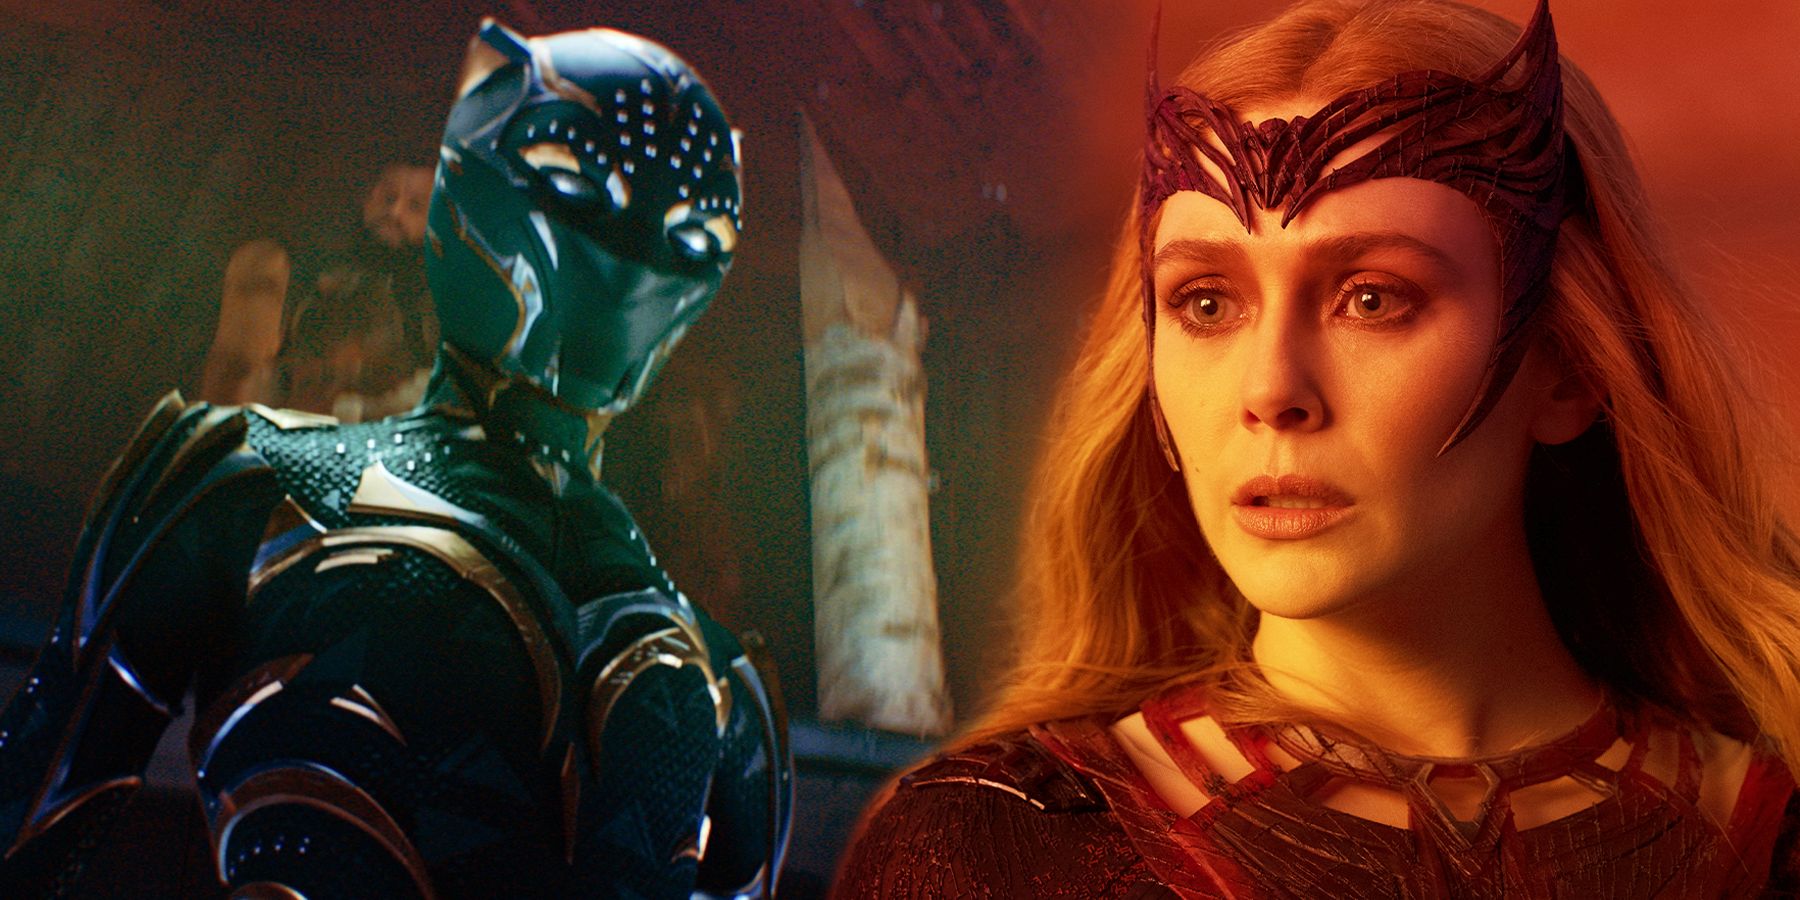 On the left, Black Panther from movie 'Black Panther: Wakanda Forever'. On the right, Scarlet Witch as seen in movie 'Doctor Strange: Multiverse of Madness'.